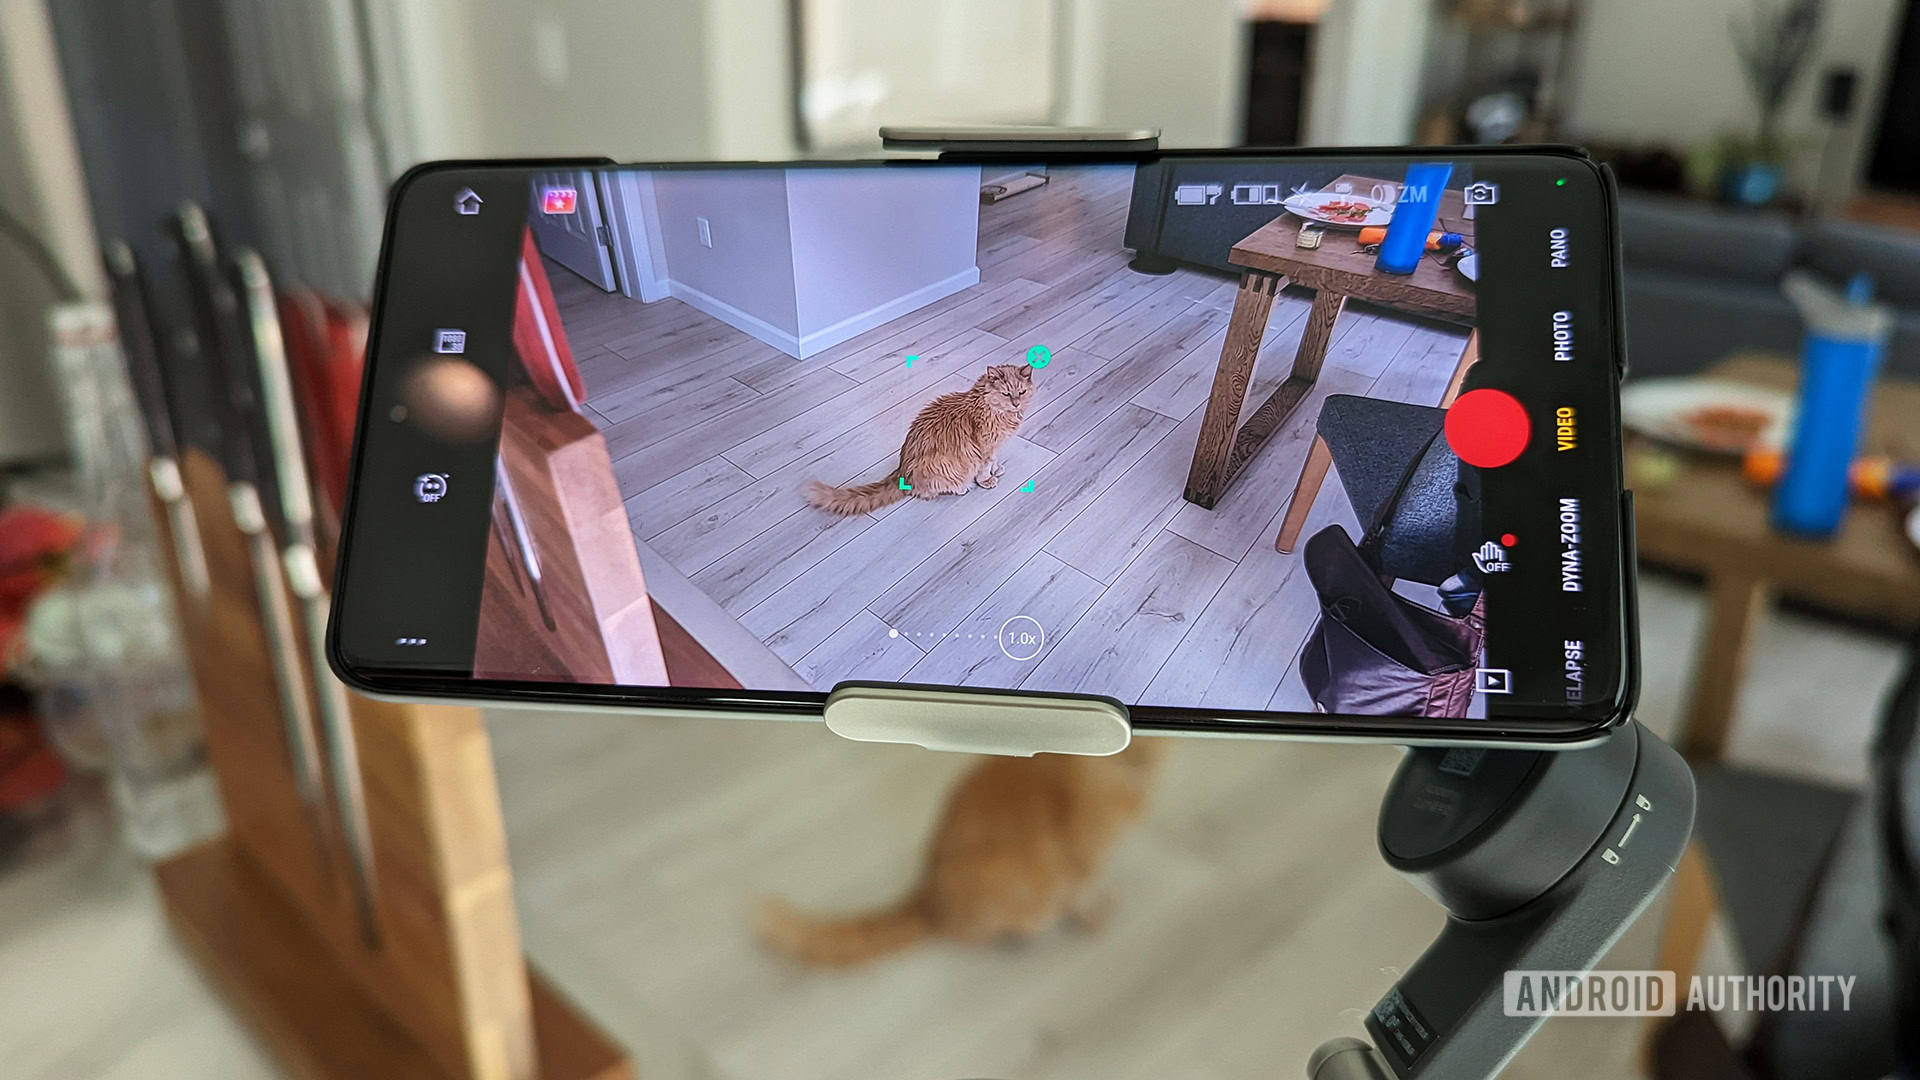 The DJI Osmo Mobile 6 comes with an exclusive feature for iPhone users 